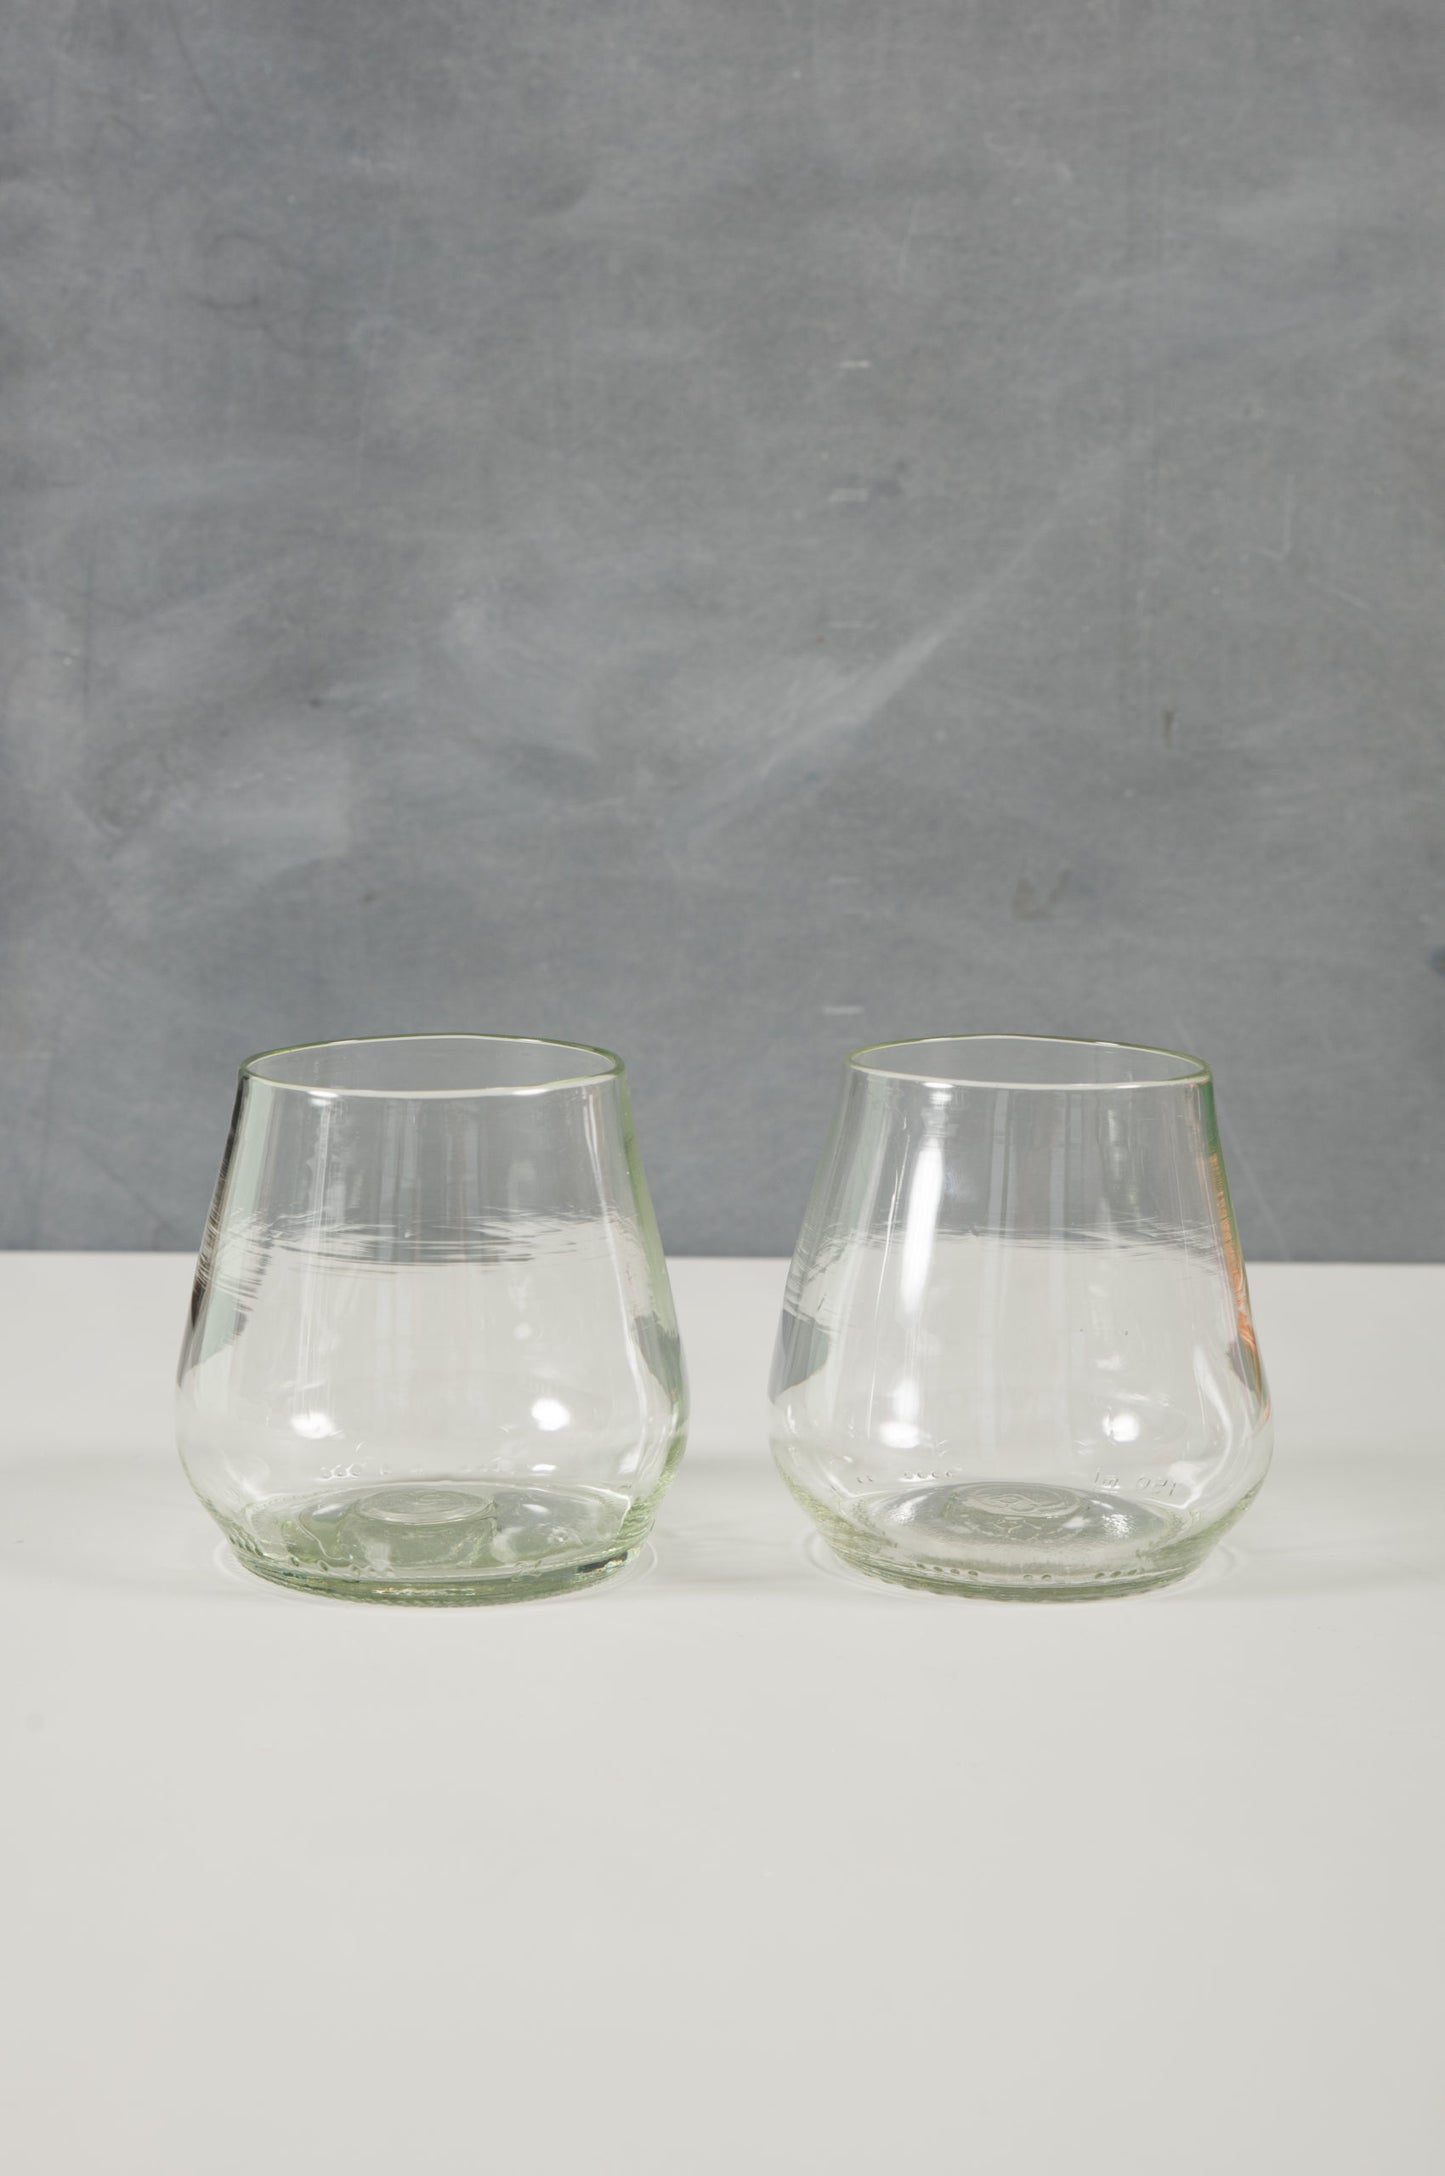 clear wine or water glasses made from recycled glass